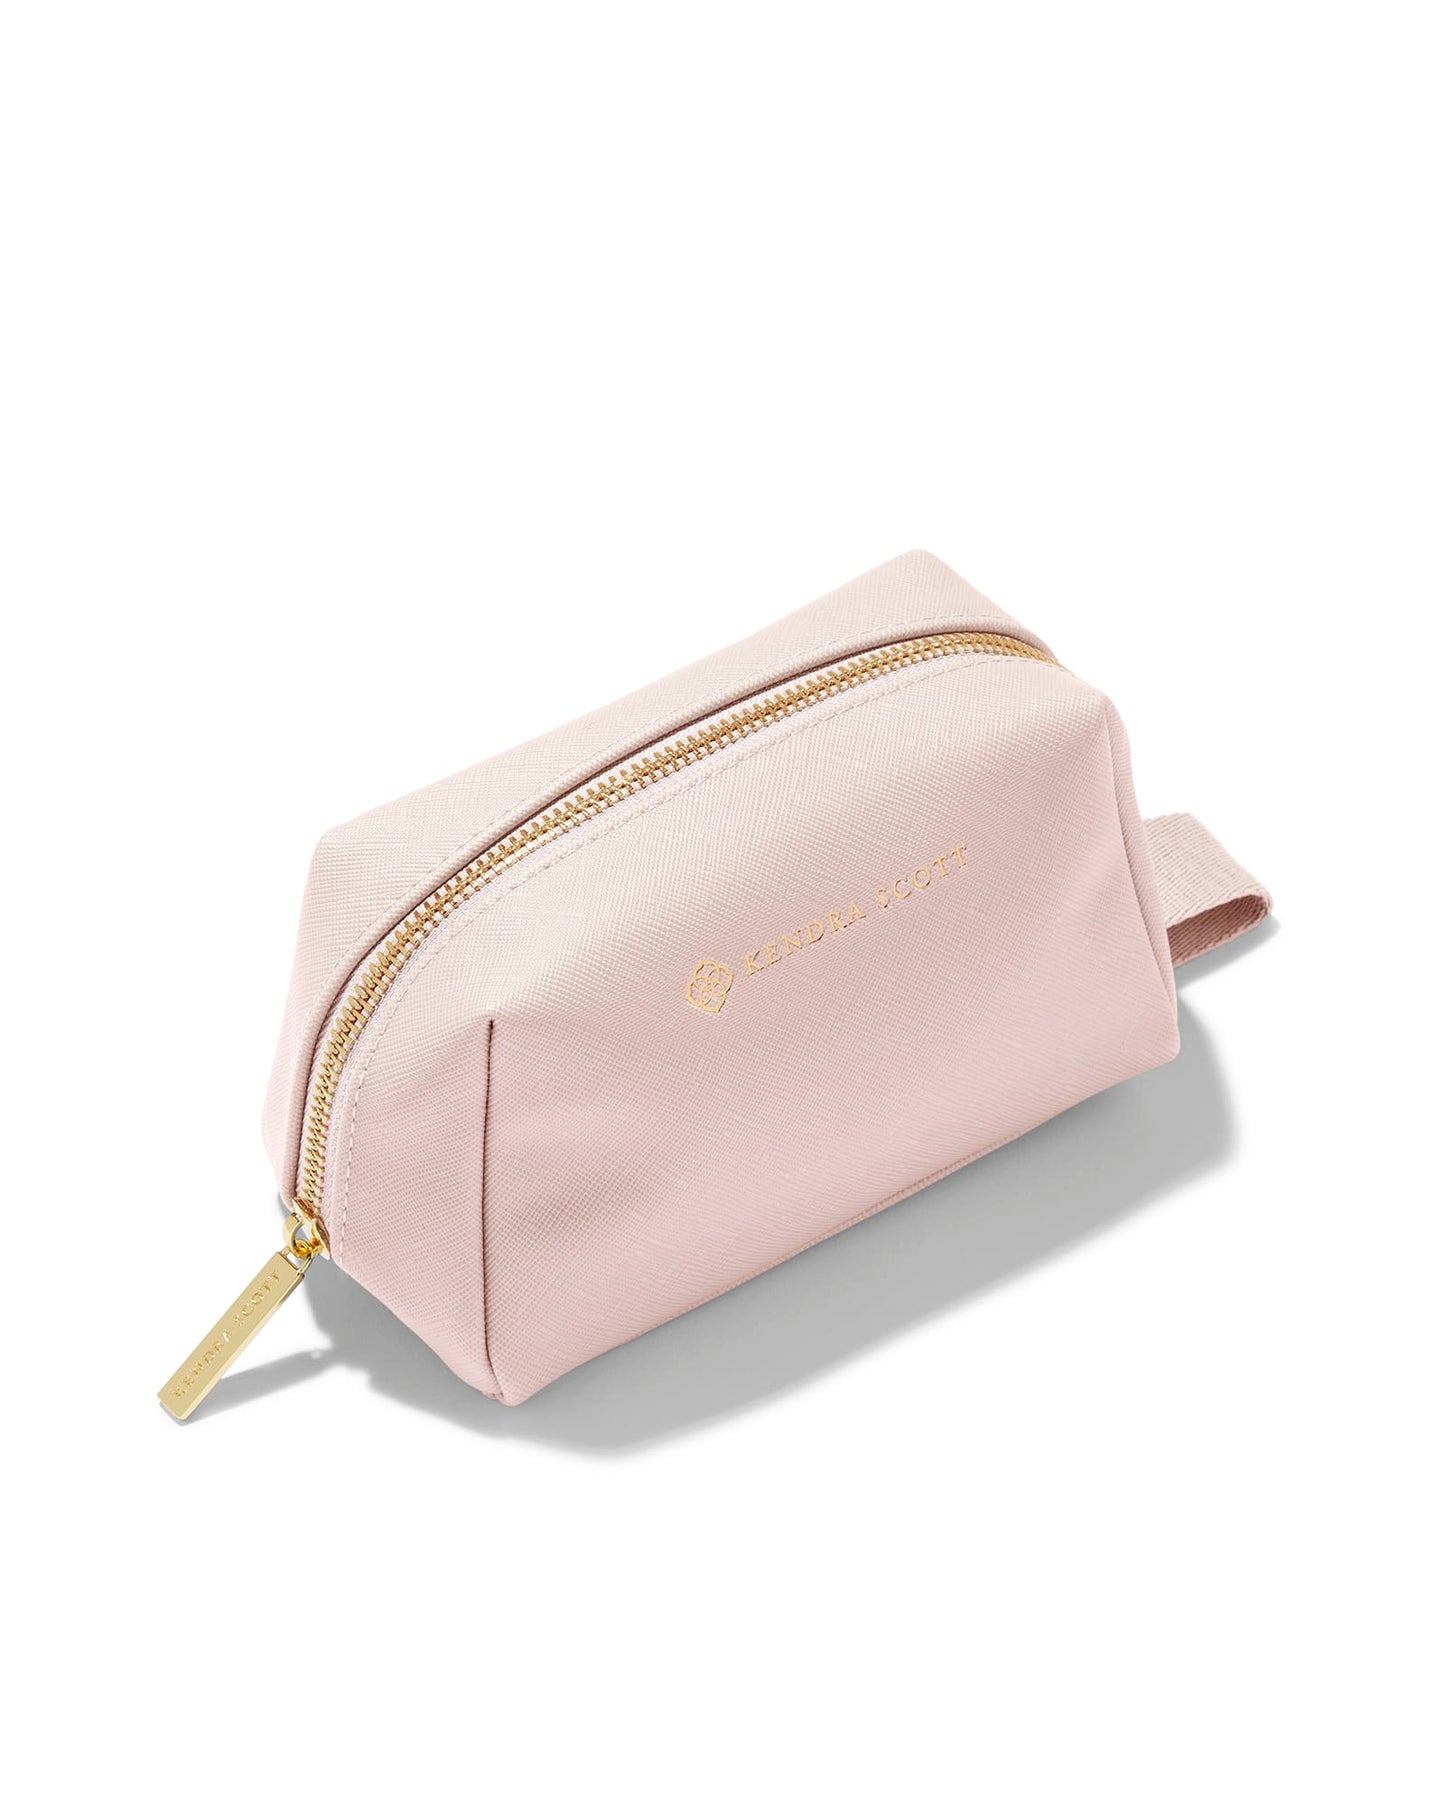 light pink cosmetic bag with gold zipper and Kendra Scott label MaterialPolyurethane Size6.1" (L) X 3.5" (W) X 3.7" (H)